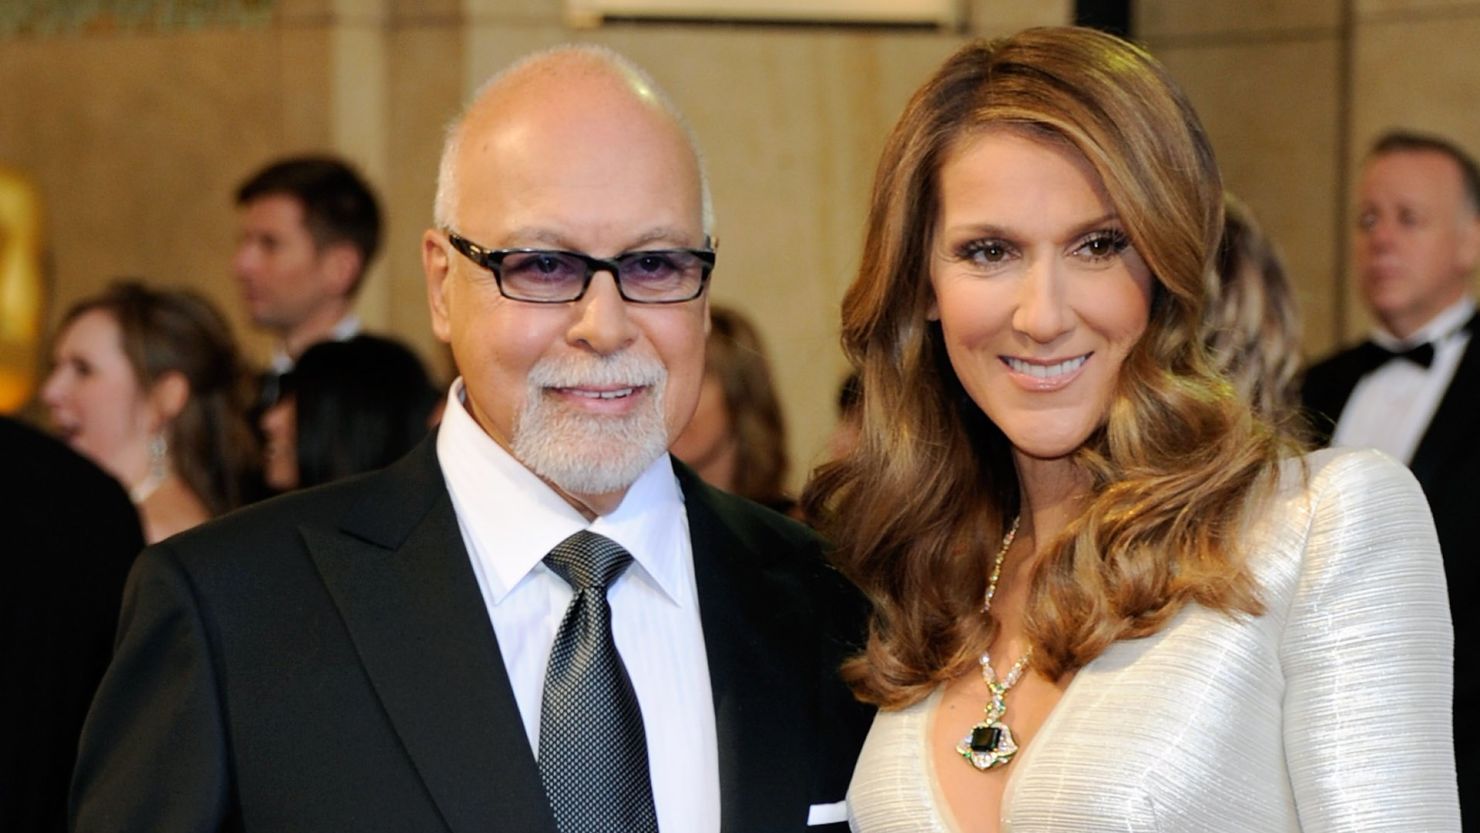 Rene Angelil and his wife, Celine Dion, here at the Oscars in 2011, first met when she was a teenager.